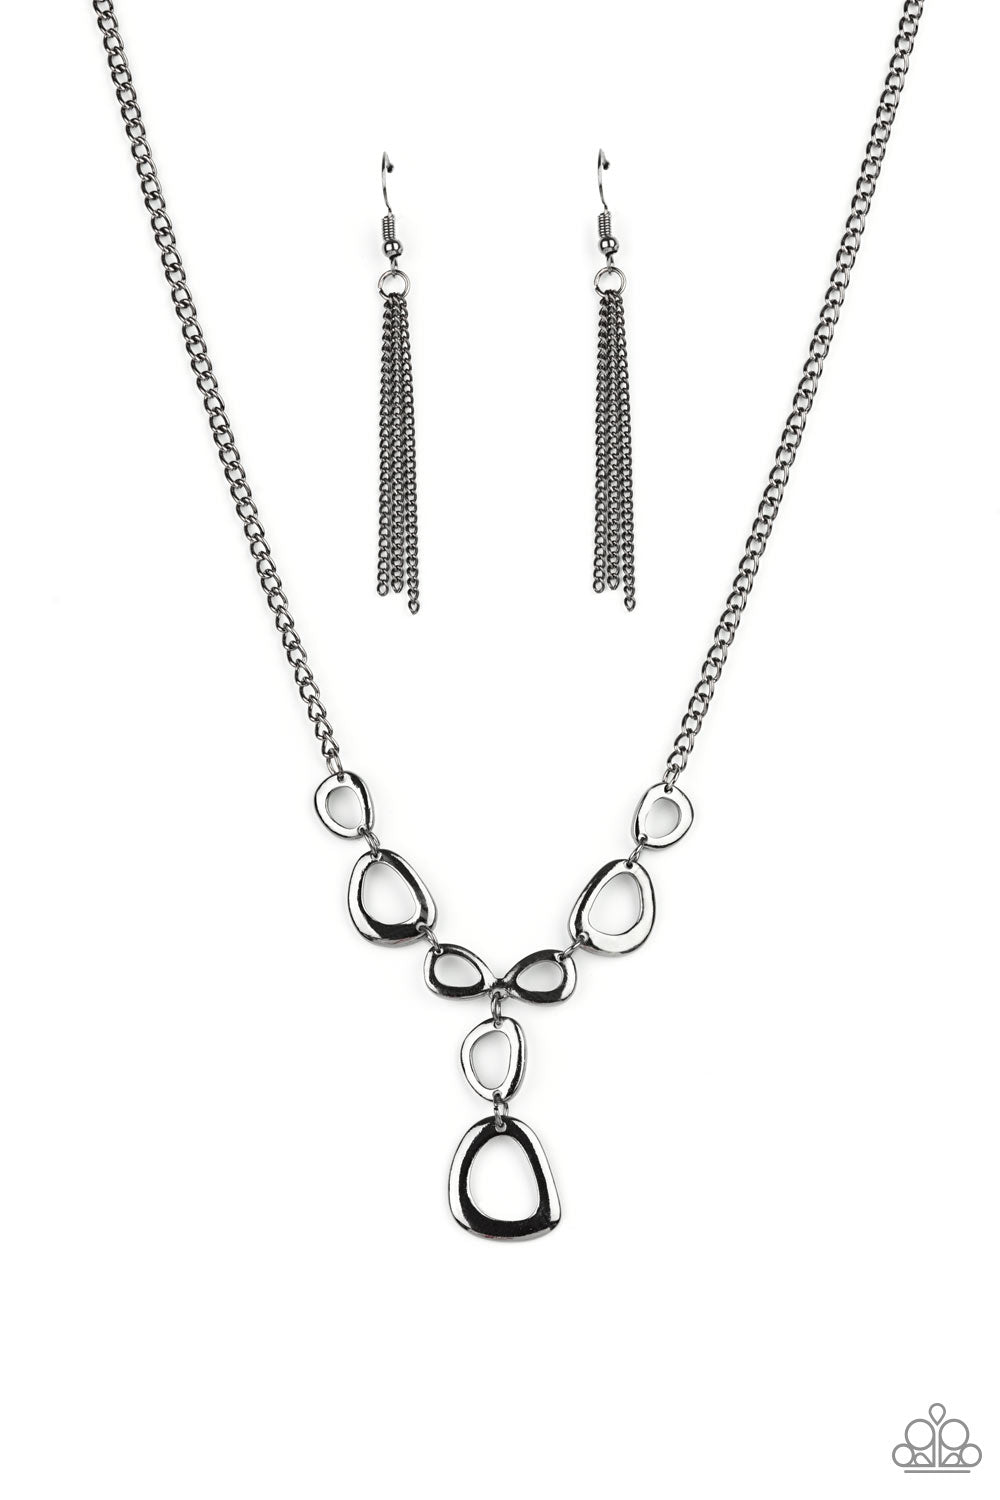 So Mod Paparazzi Accessories Necklaces with Earrings Black